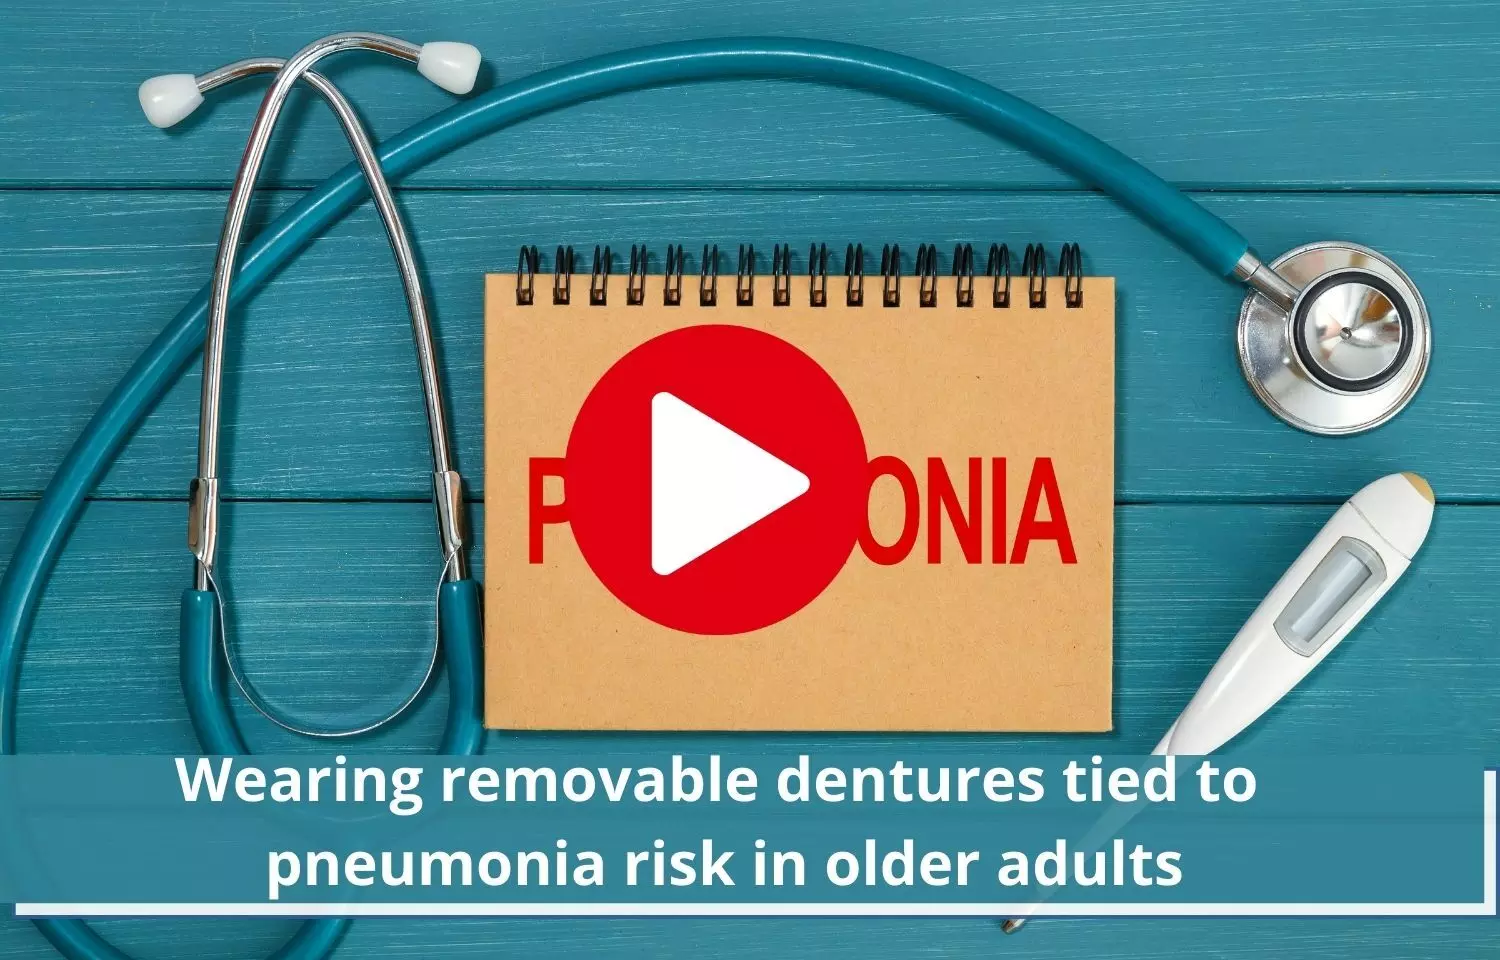 Denture wearing acts as a predictor for pneumonia in older adults